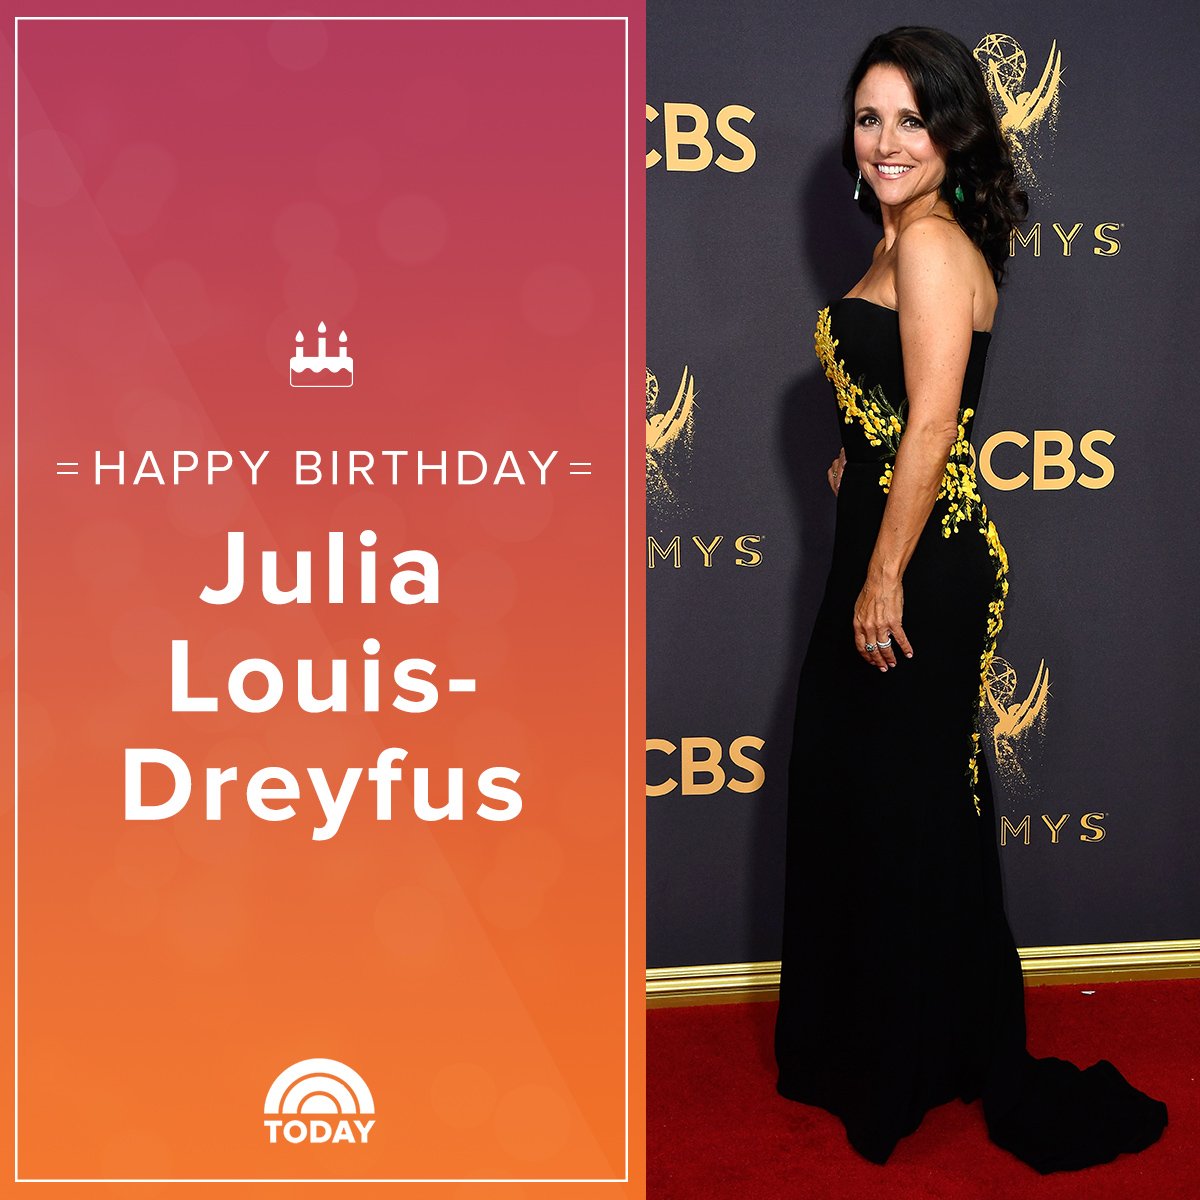 Happy birthday to the lovely Julia Louis-Dreyfus!  